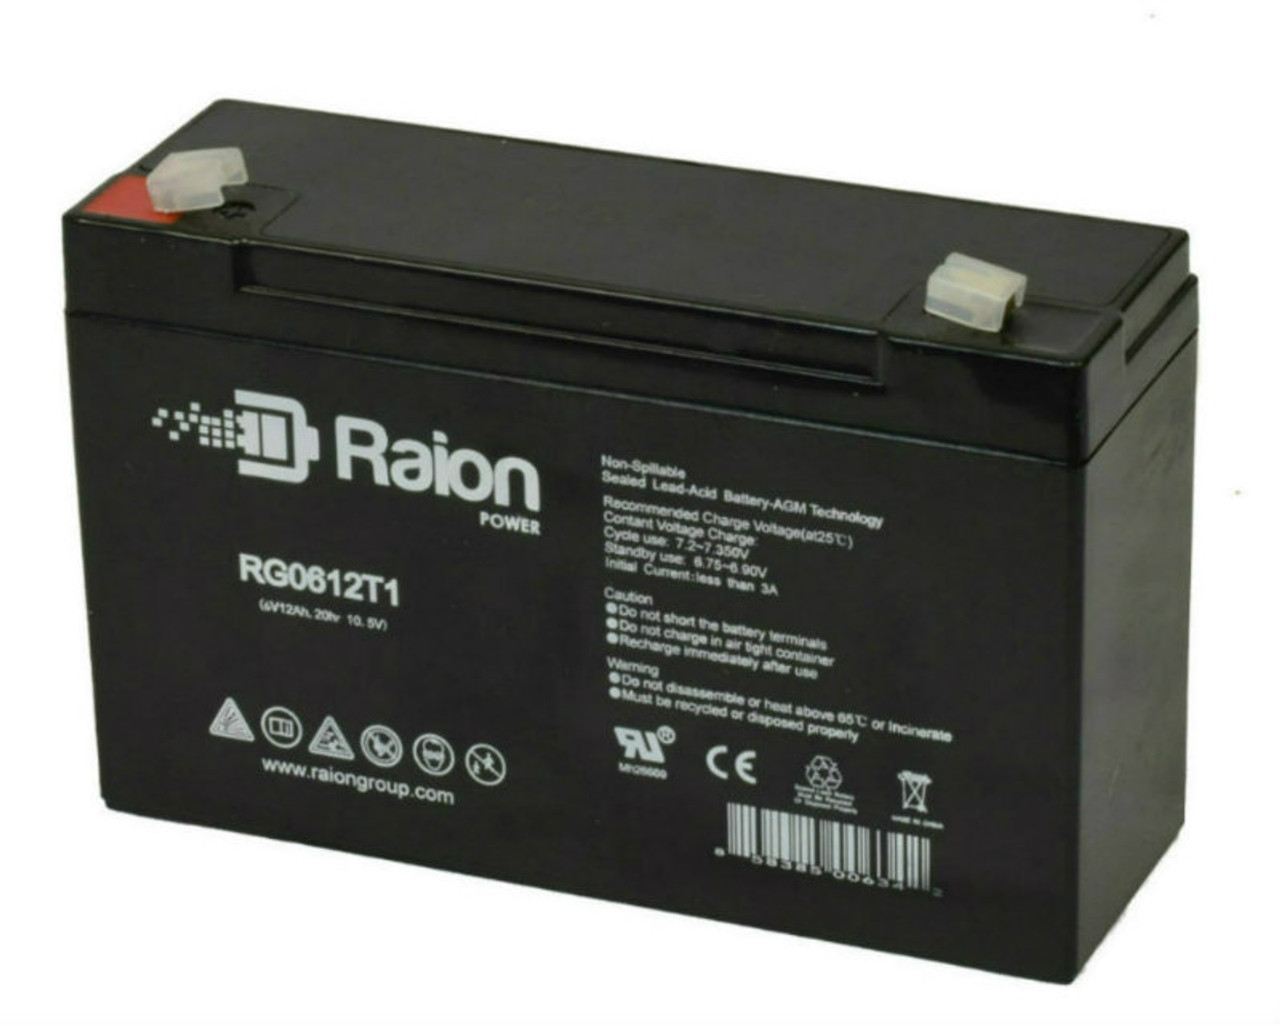 Raion Power RG06120T1 6V 12Ah Replacement UPS Battery Cartridge for IBM NP700